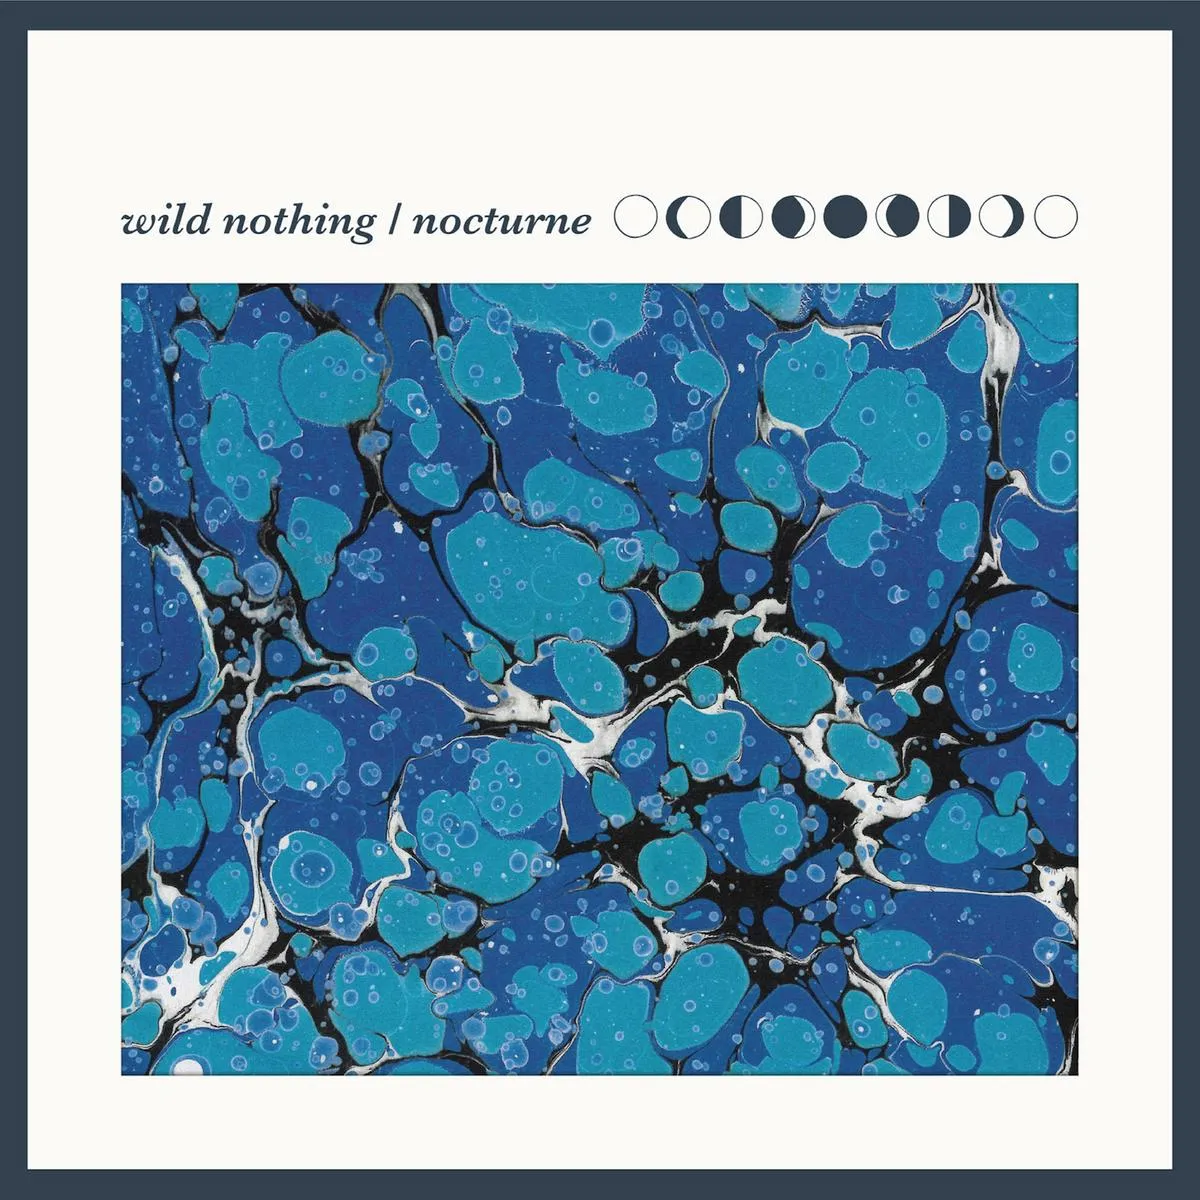 <strong>Wild Nothing - Nocturne - 10th Anniversary Edition</strong> (Vinyl LP - blue)